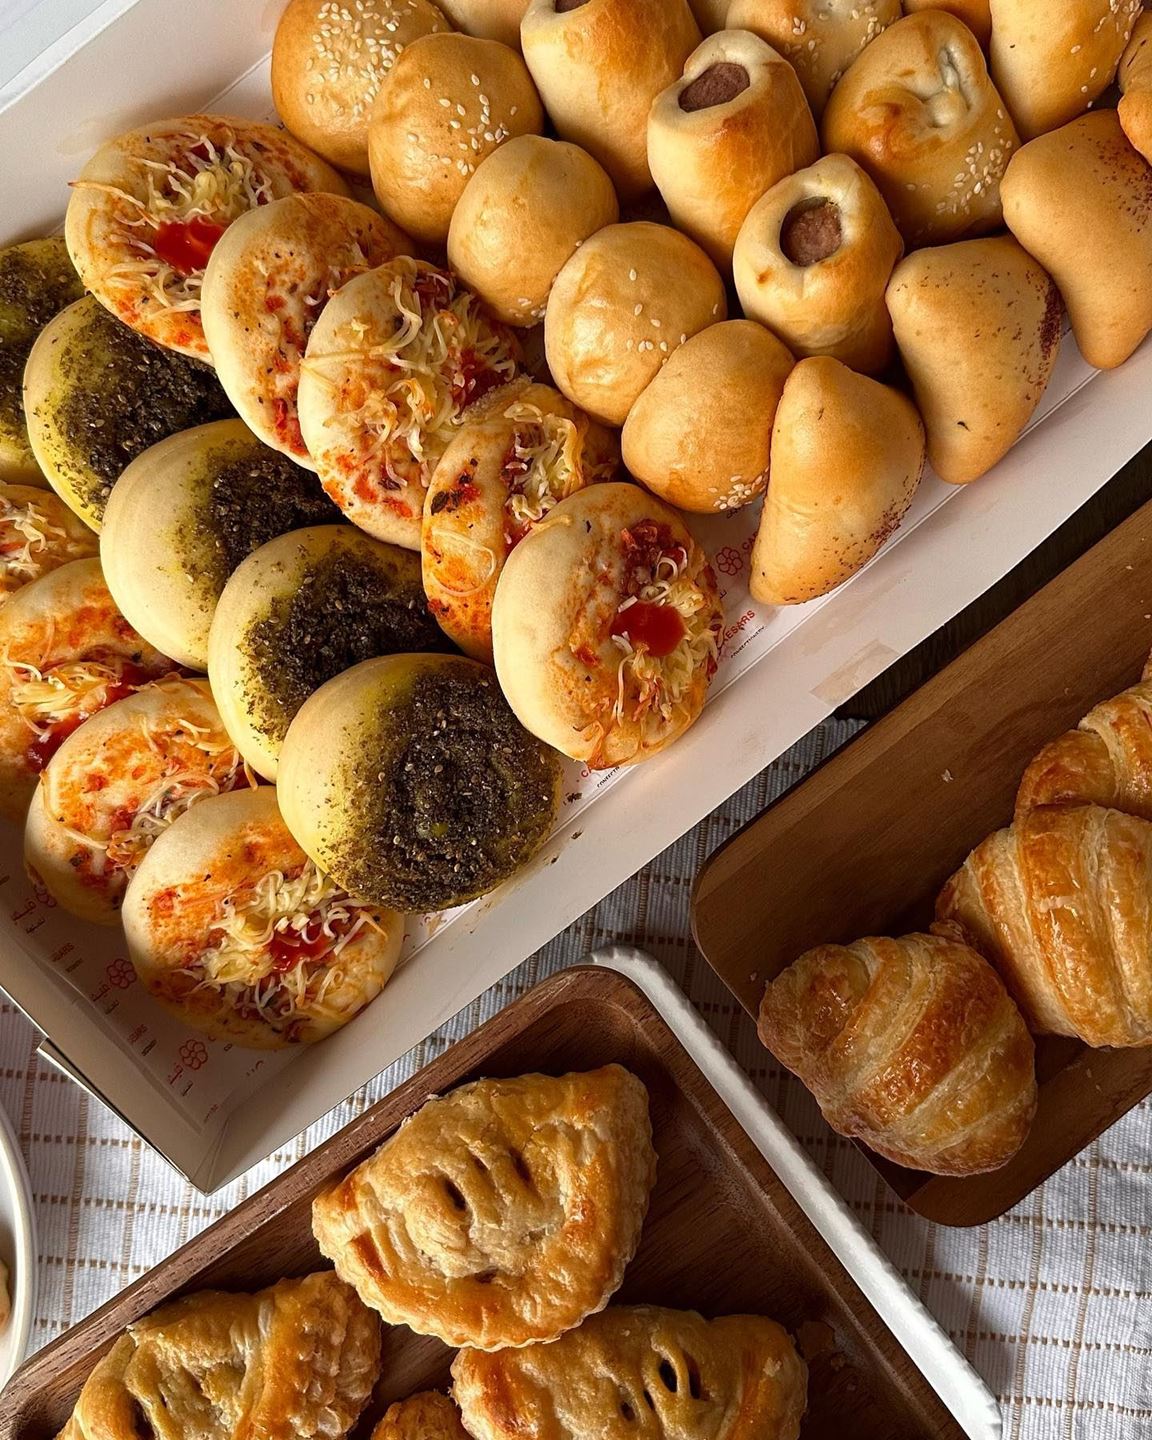 Where to order Amazing Pastries for Occasions and Gatherings in Kuwait?